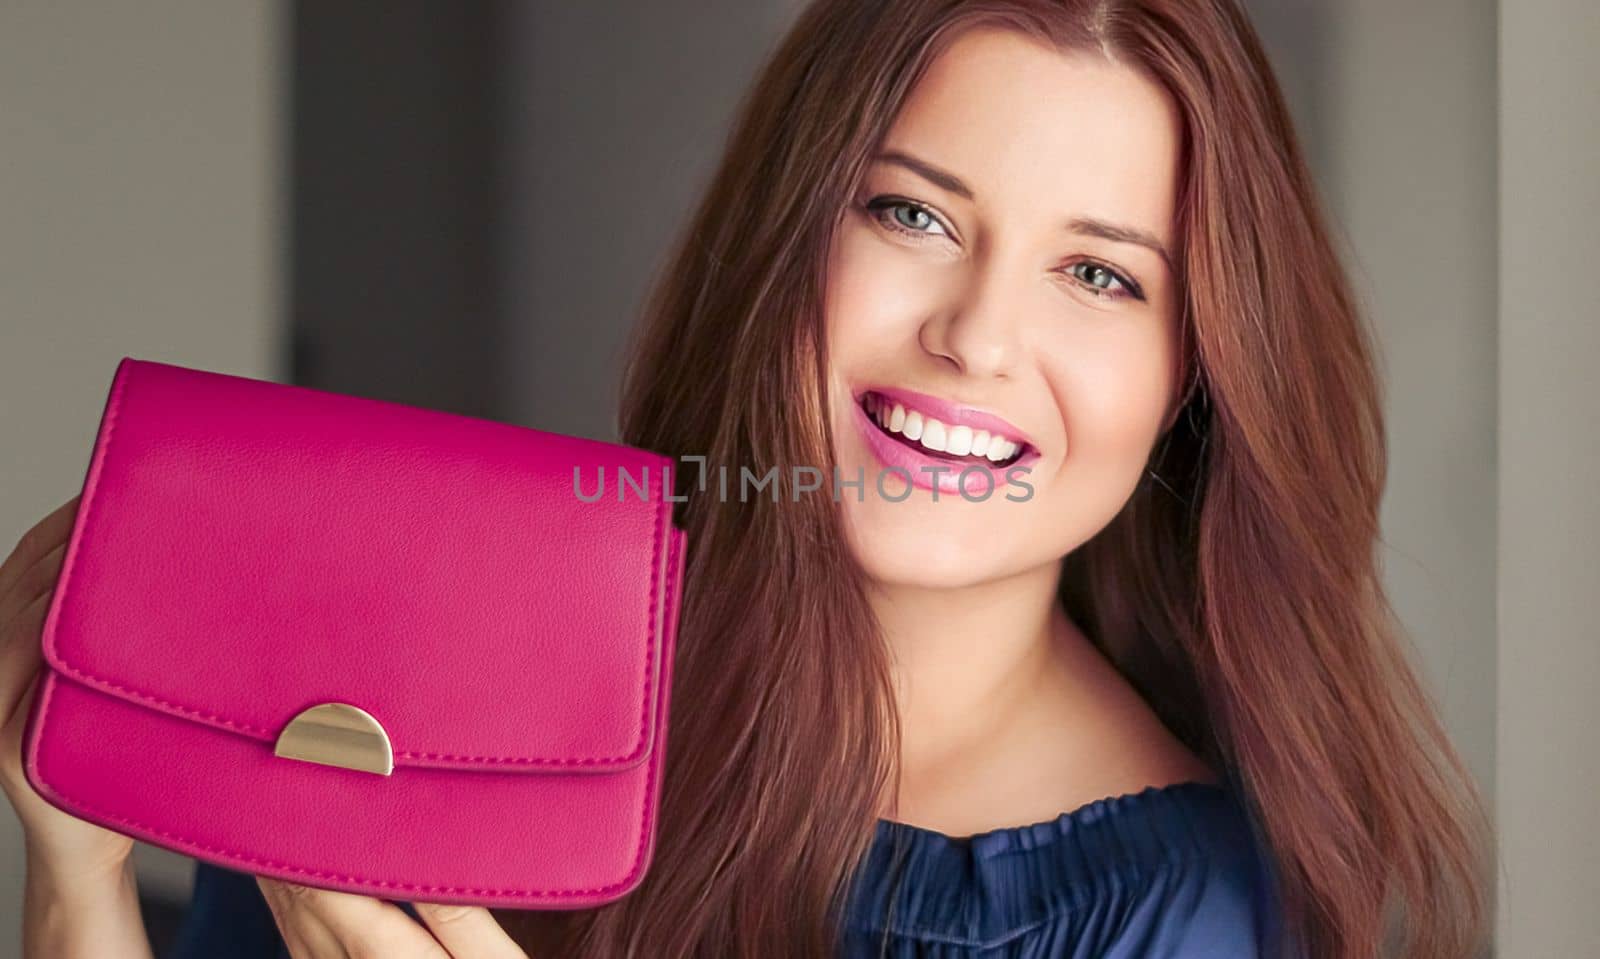 Fashion and accessories, happy beautiful woman holding small pink handbag with golden details as stylish accessory and luxury shopping concept